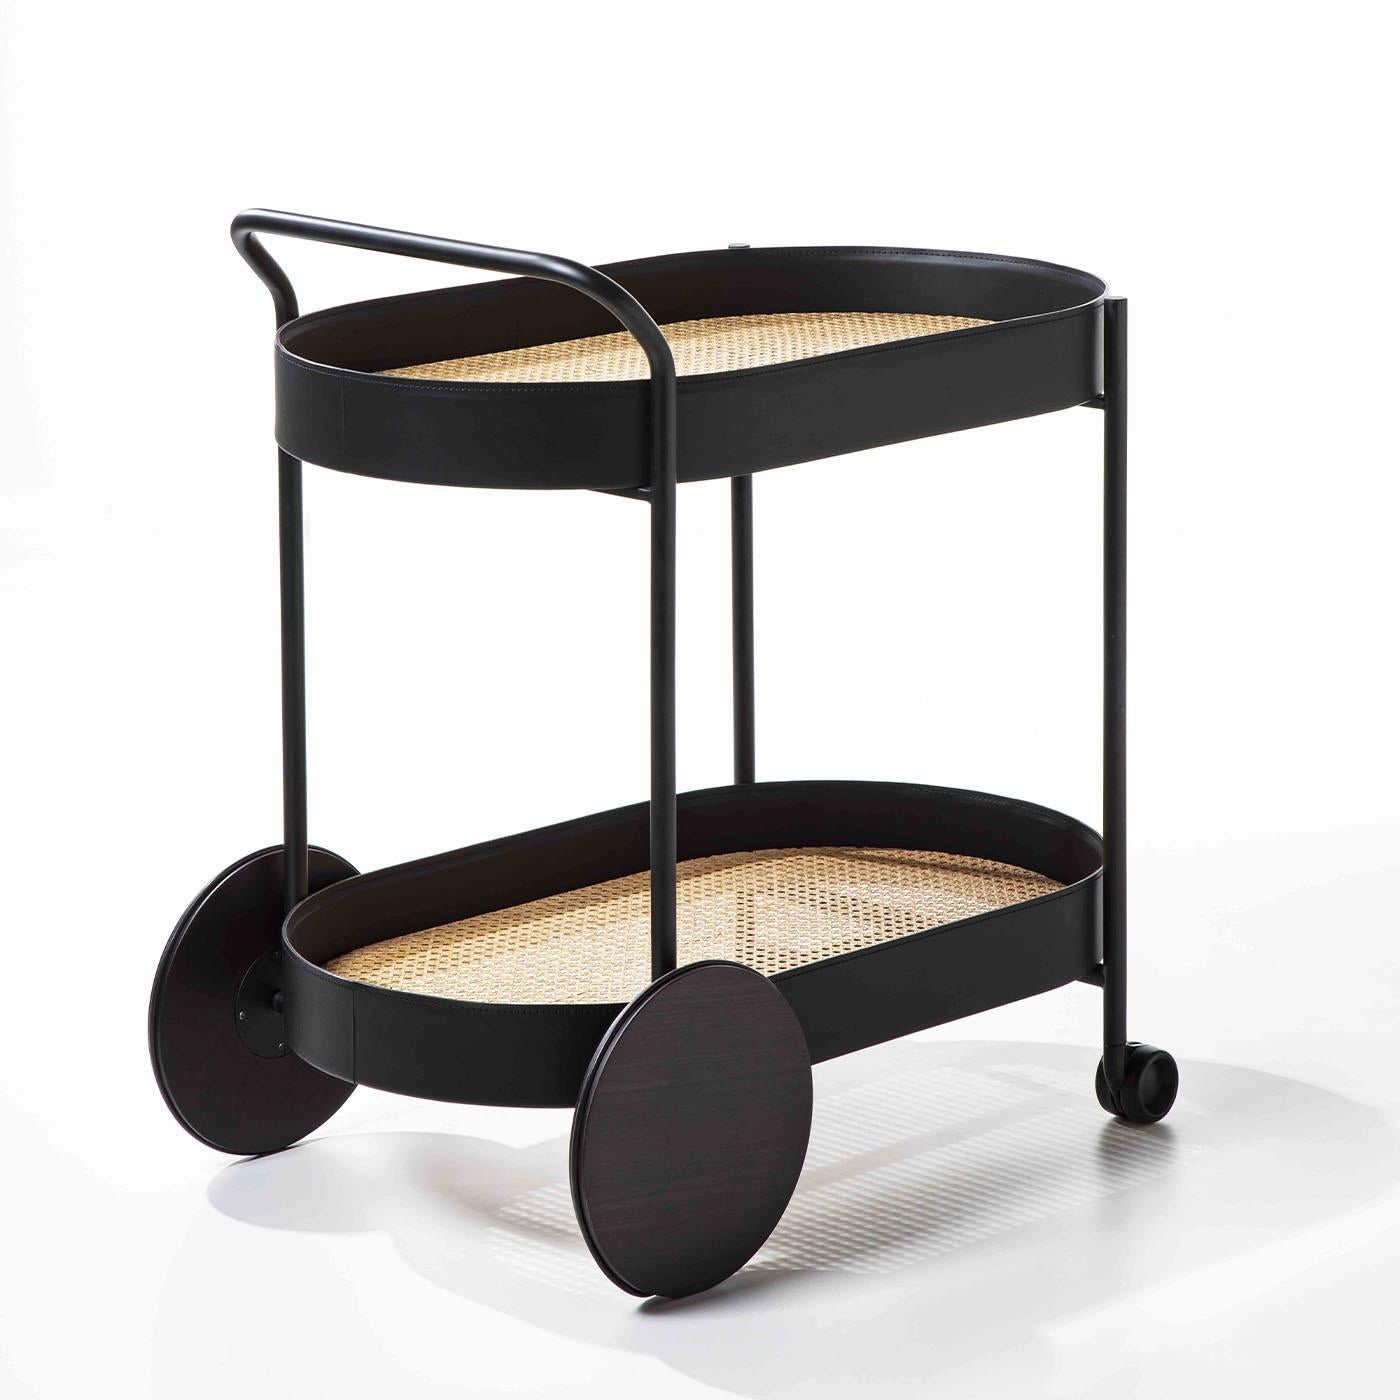 A stylish must-have for entertaining events, this cart is equipped with front and back wheels for easy transportation but works equally well as a static statement topped with a decanter set or flowers in any interior. Finished in matte black, the